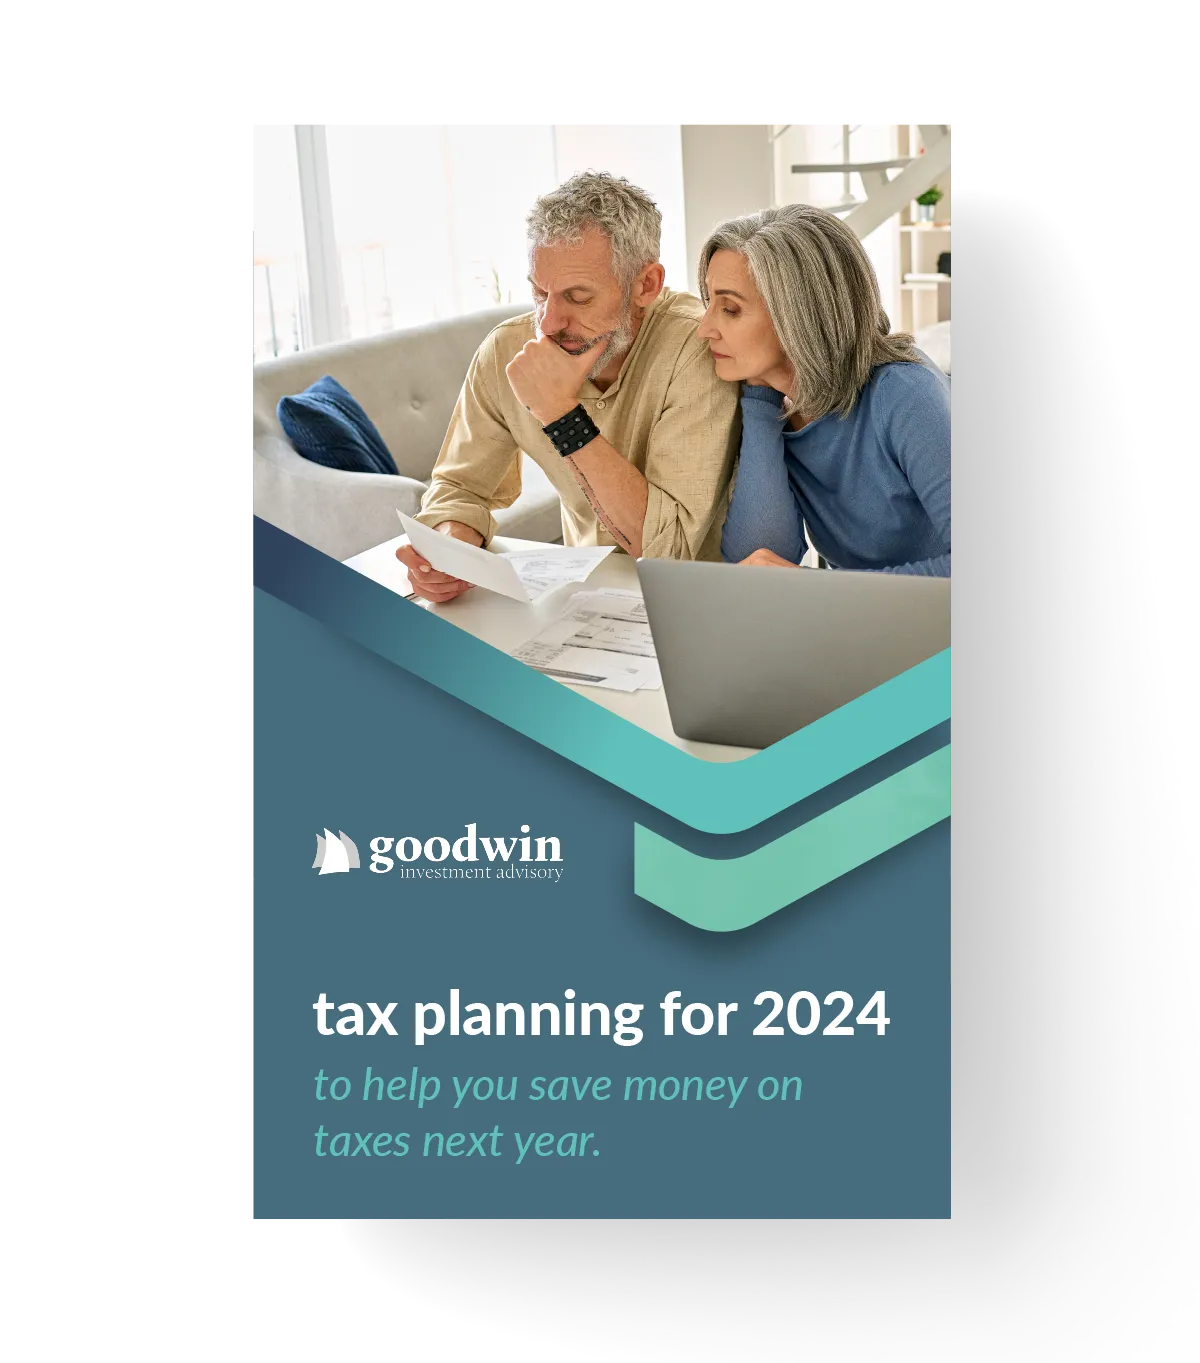 Tax planning guide for 2024